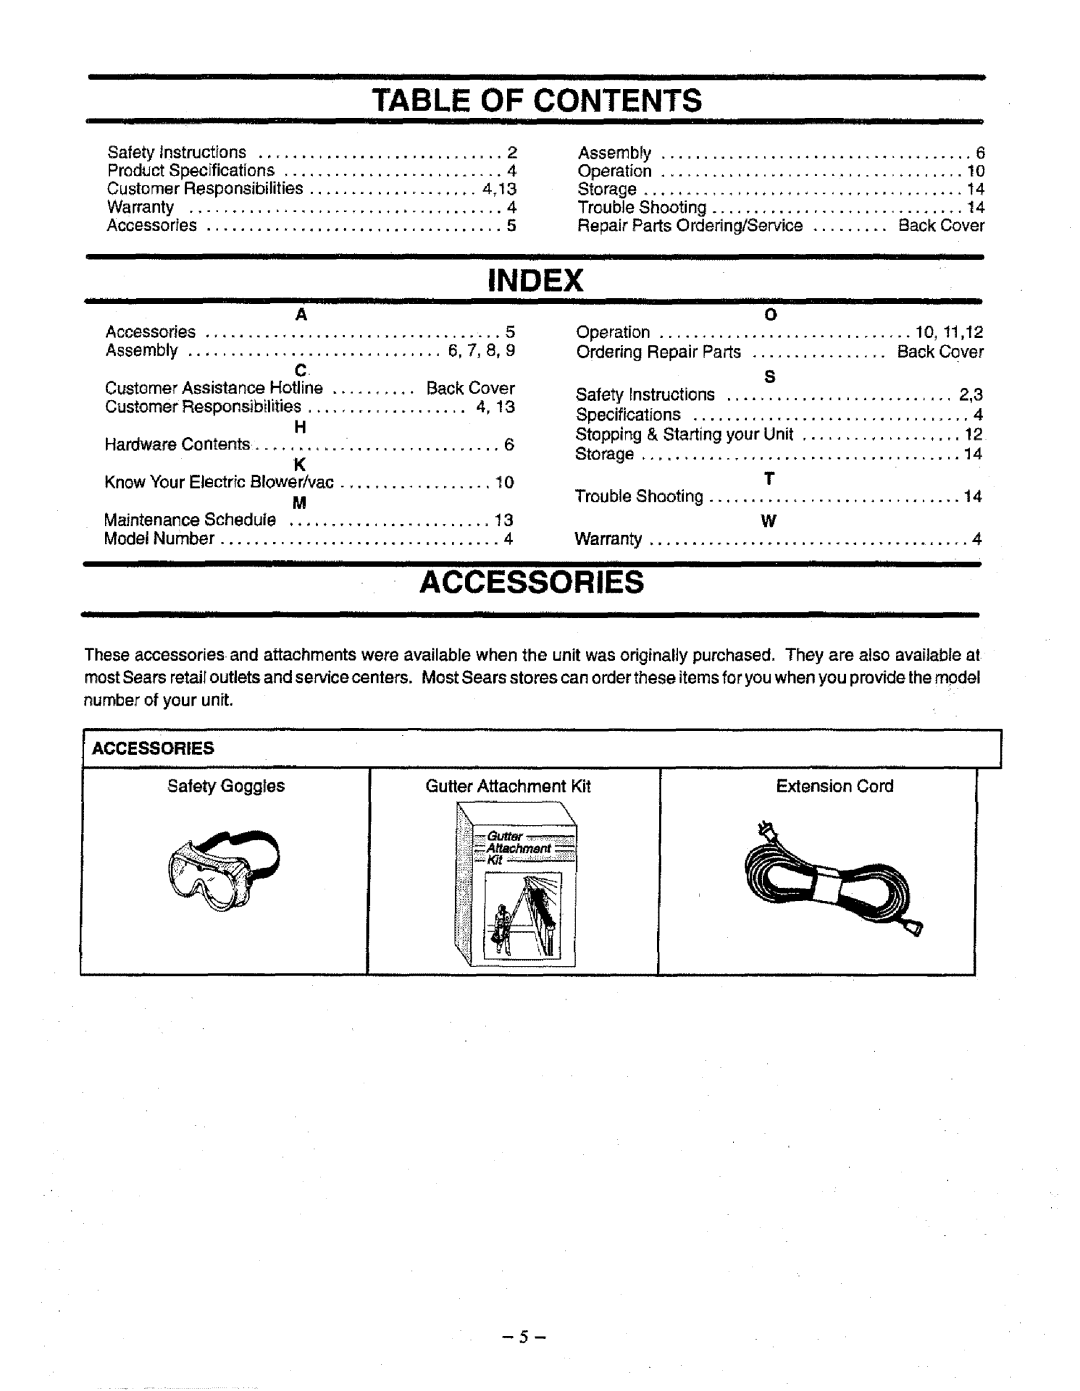 Craftsman 358.798340 manual Table Of Contents, Index, Accessories, Safety Goggles, Extension Cord 